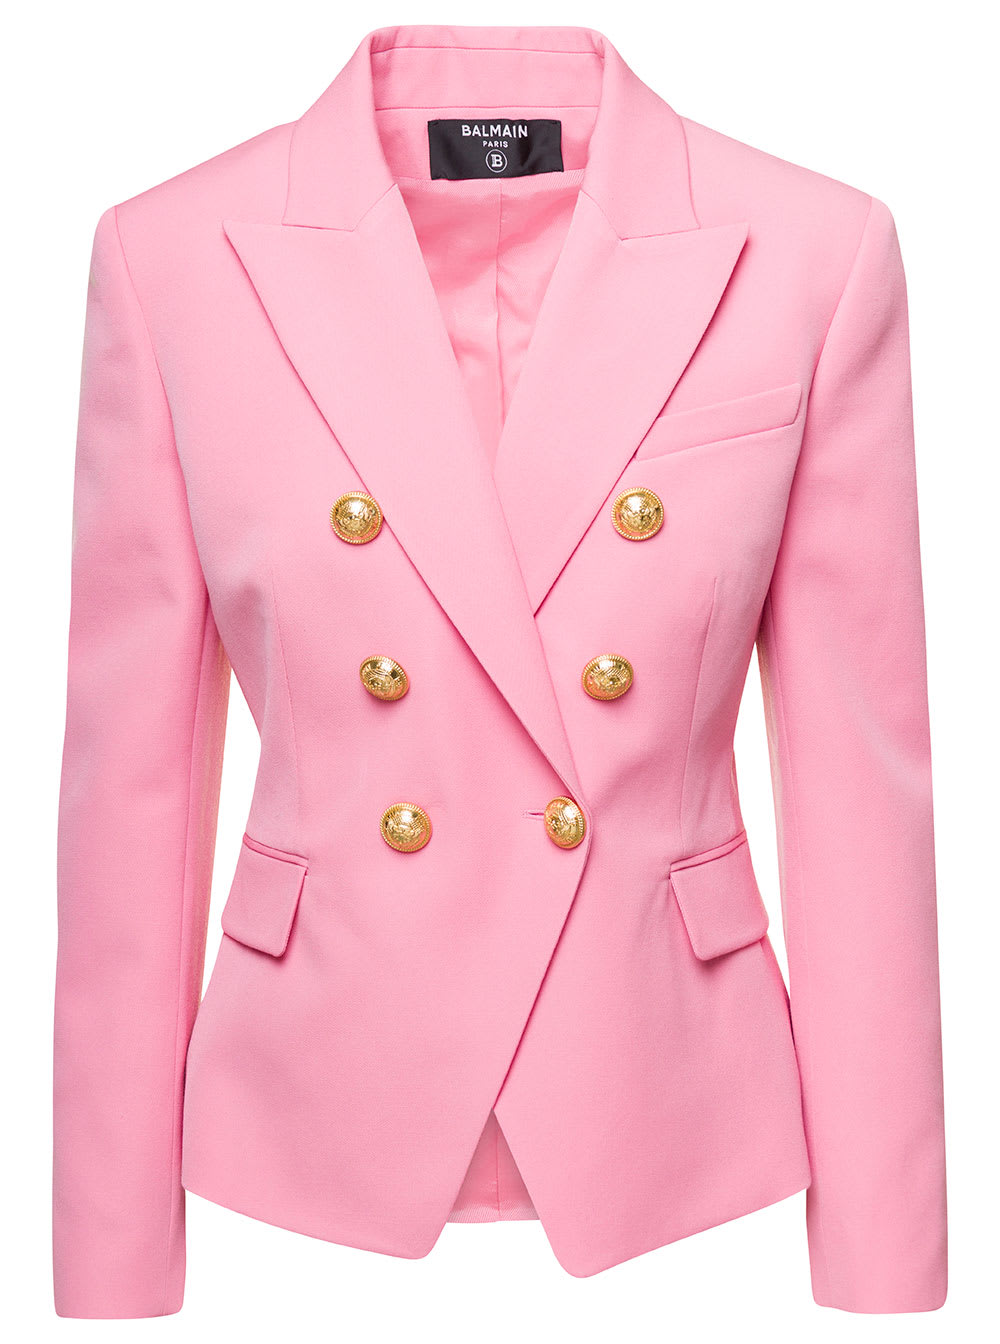 BALMAIN PINK DOUBLE-BREASTED FITTED BLAZER IN WOOL WOMAN